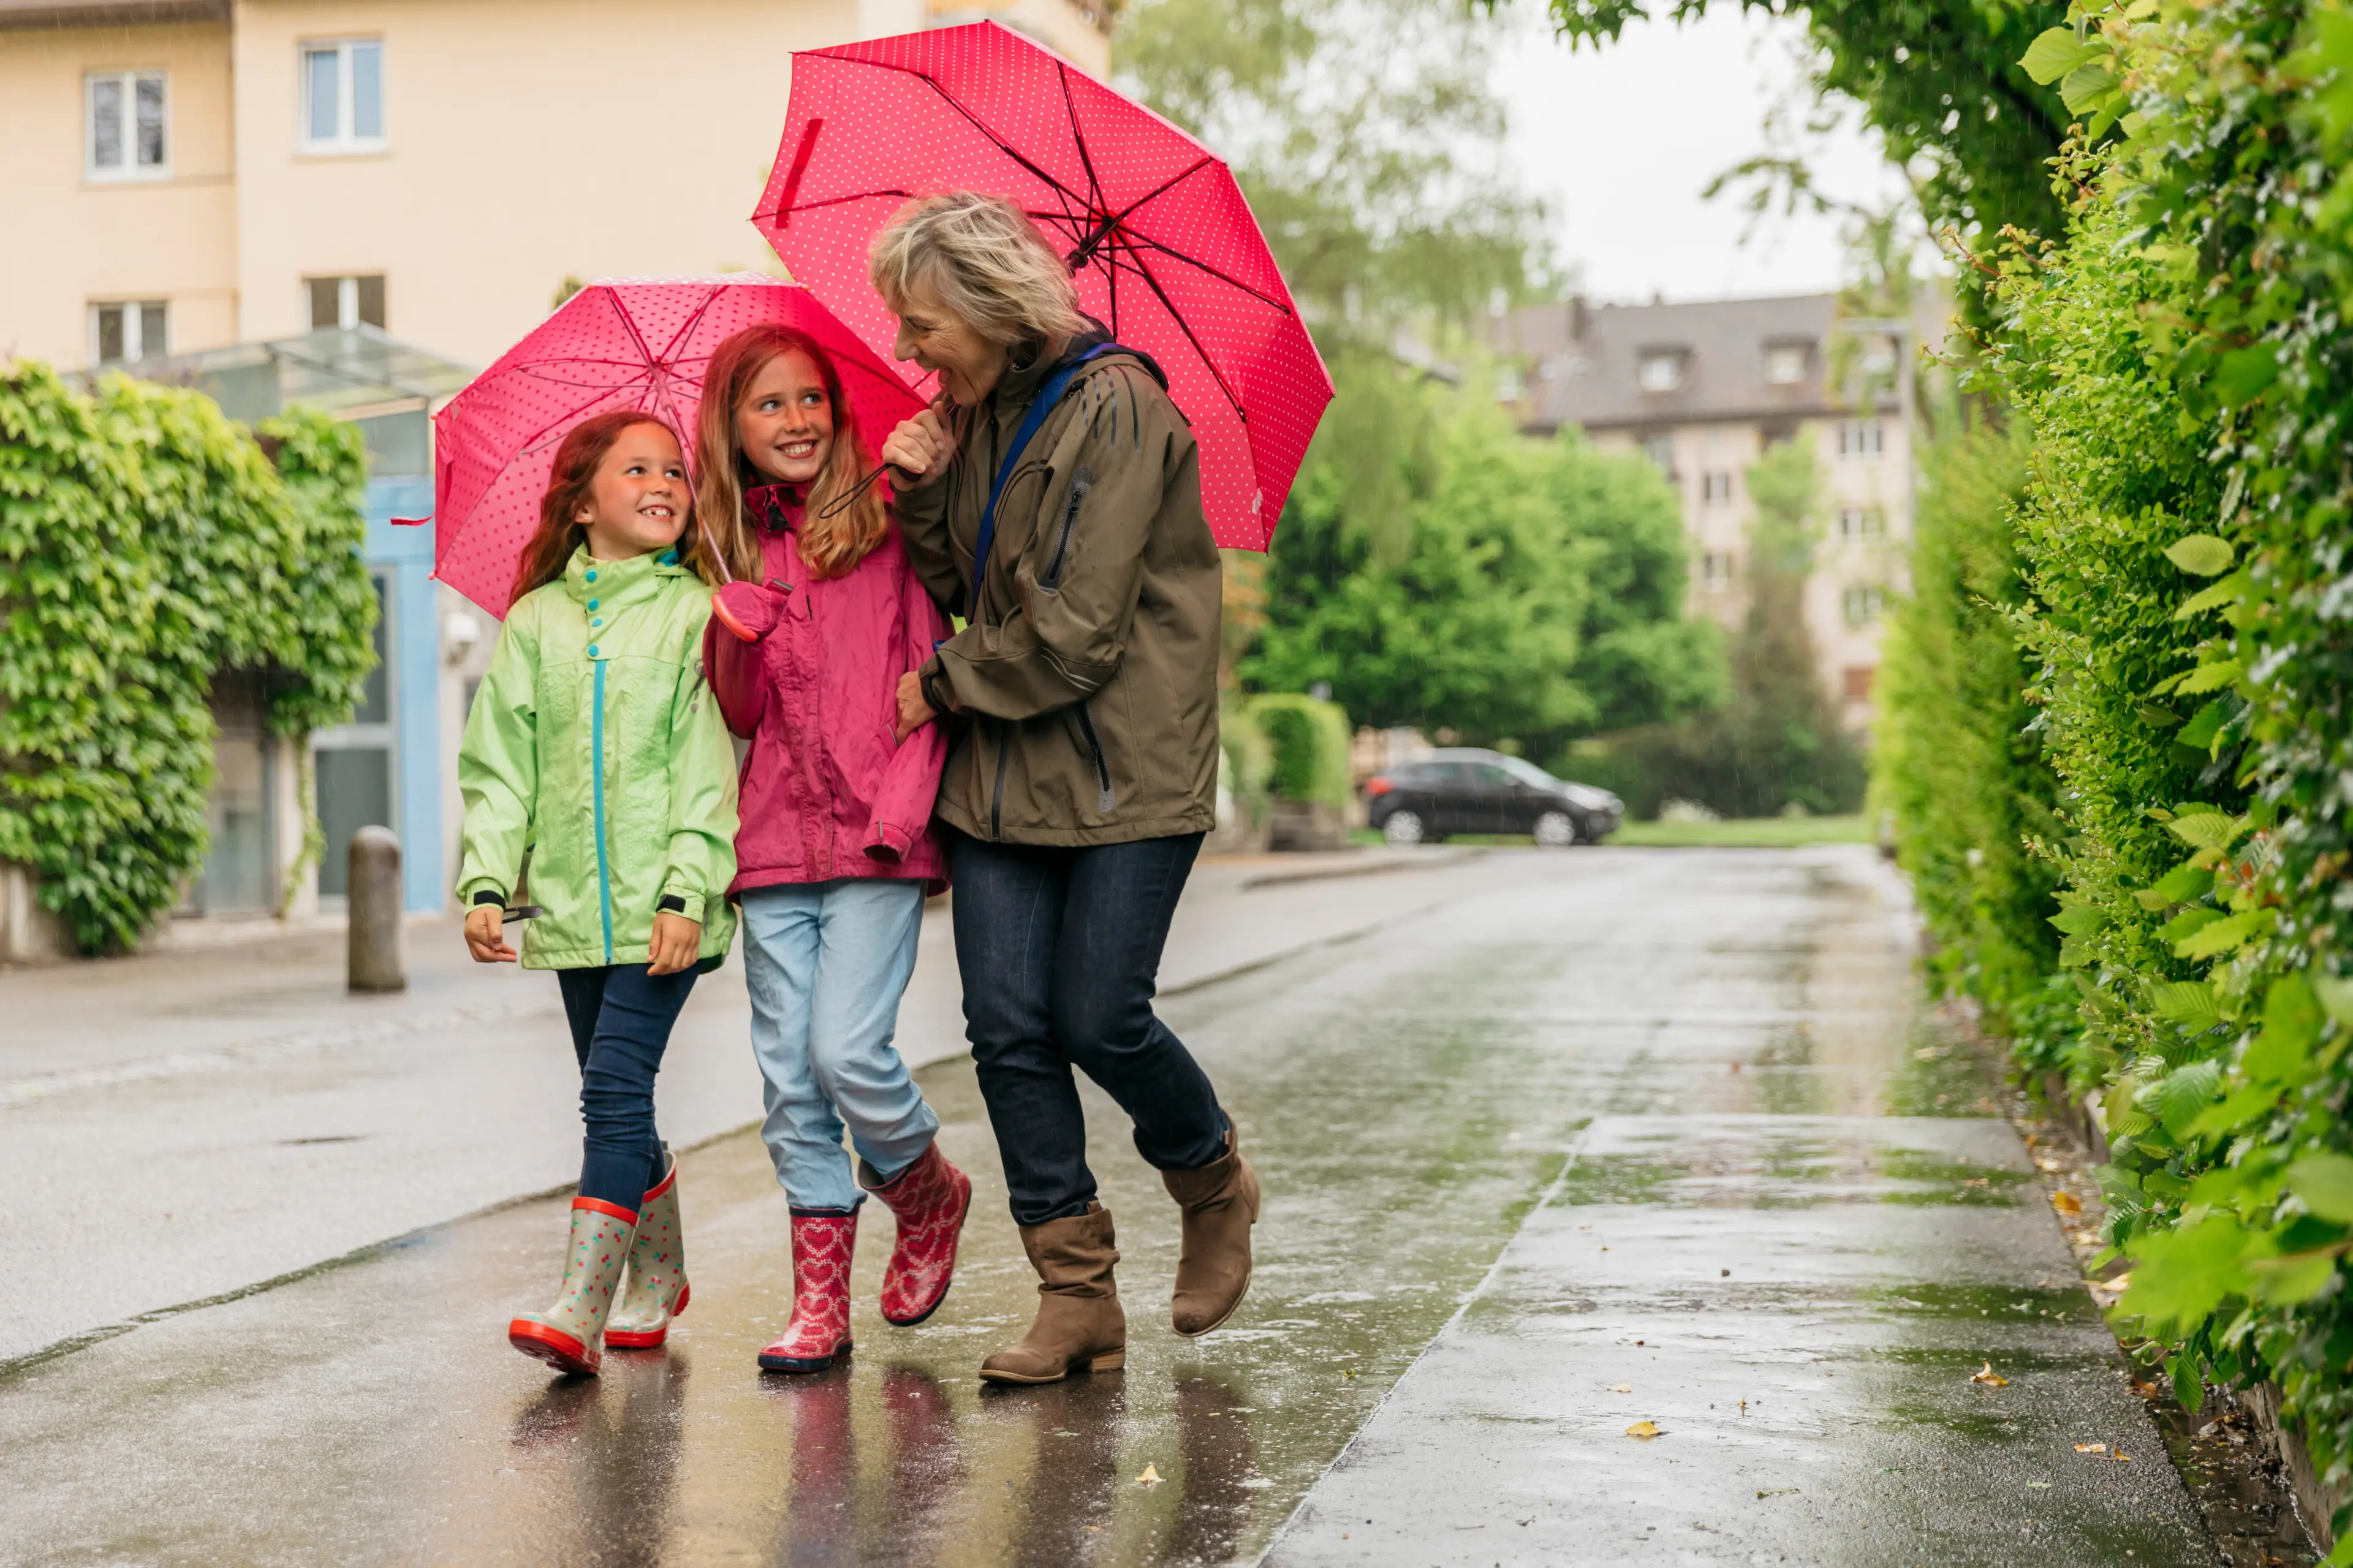 A grandmother and two little girls shelter under two pink umbrellas walking in the rain and joking.